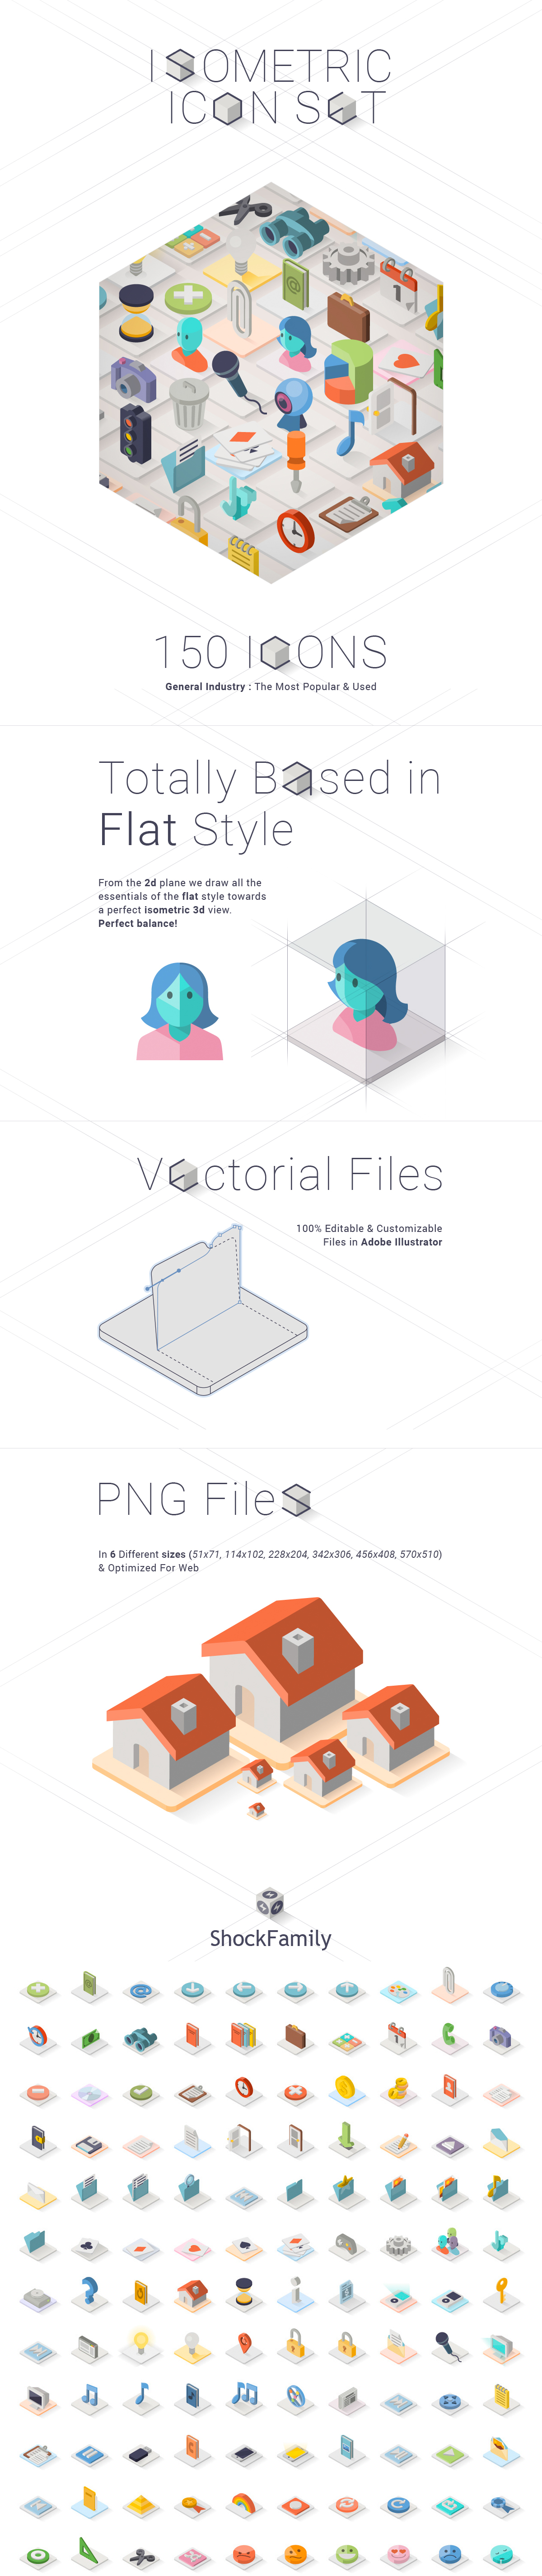 free freebie Isometric 3D tridimensional download flat Icon icons